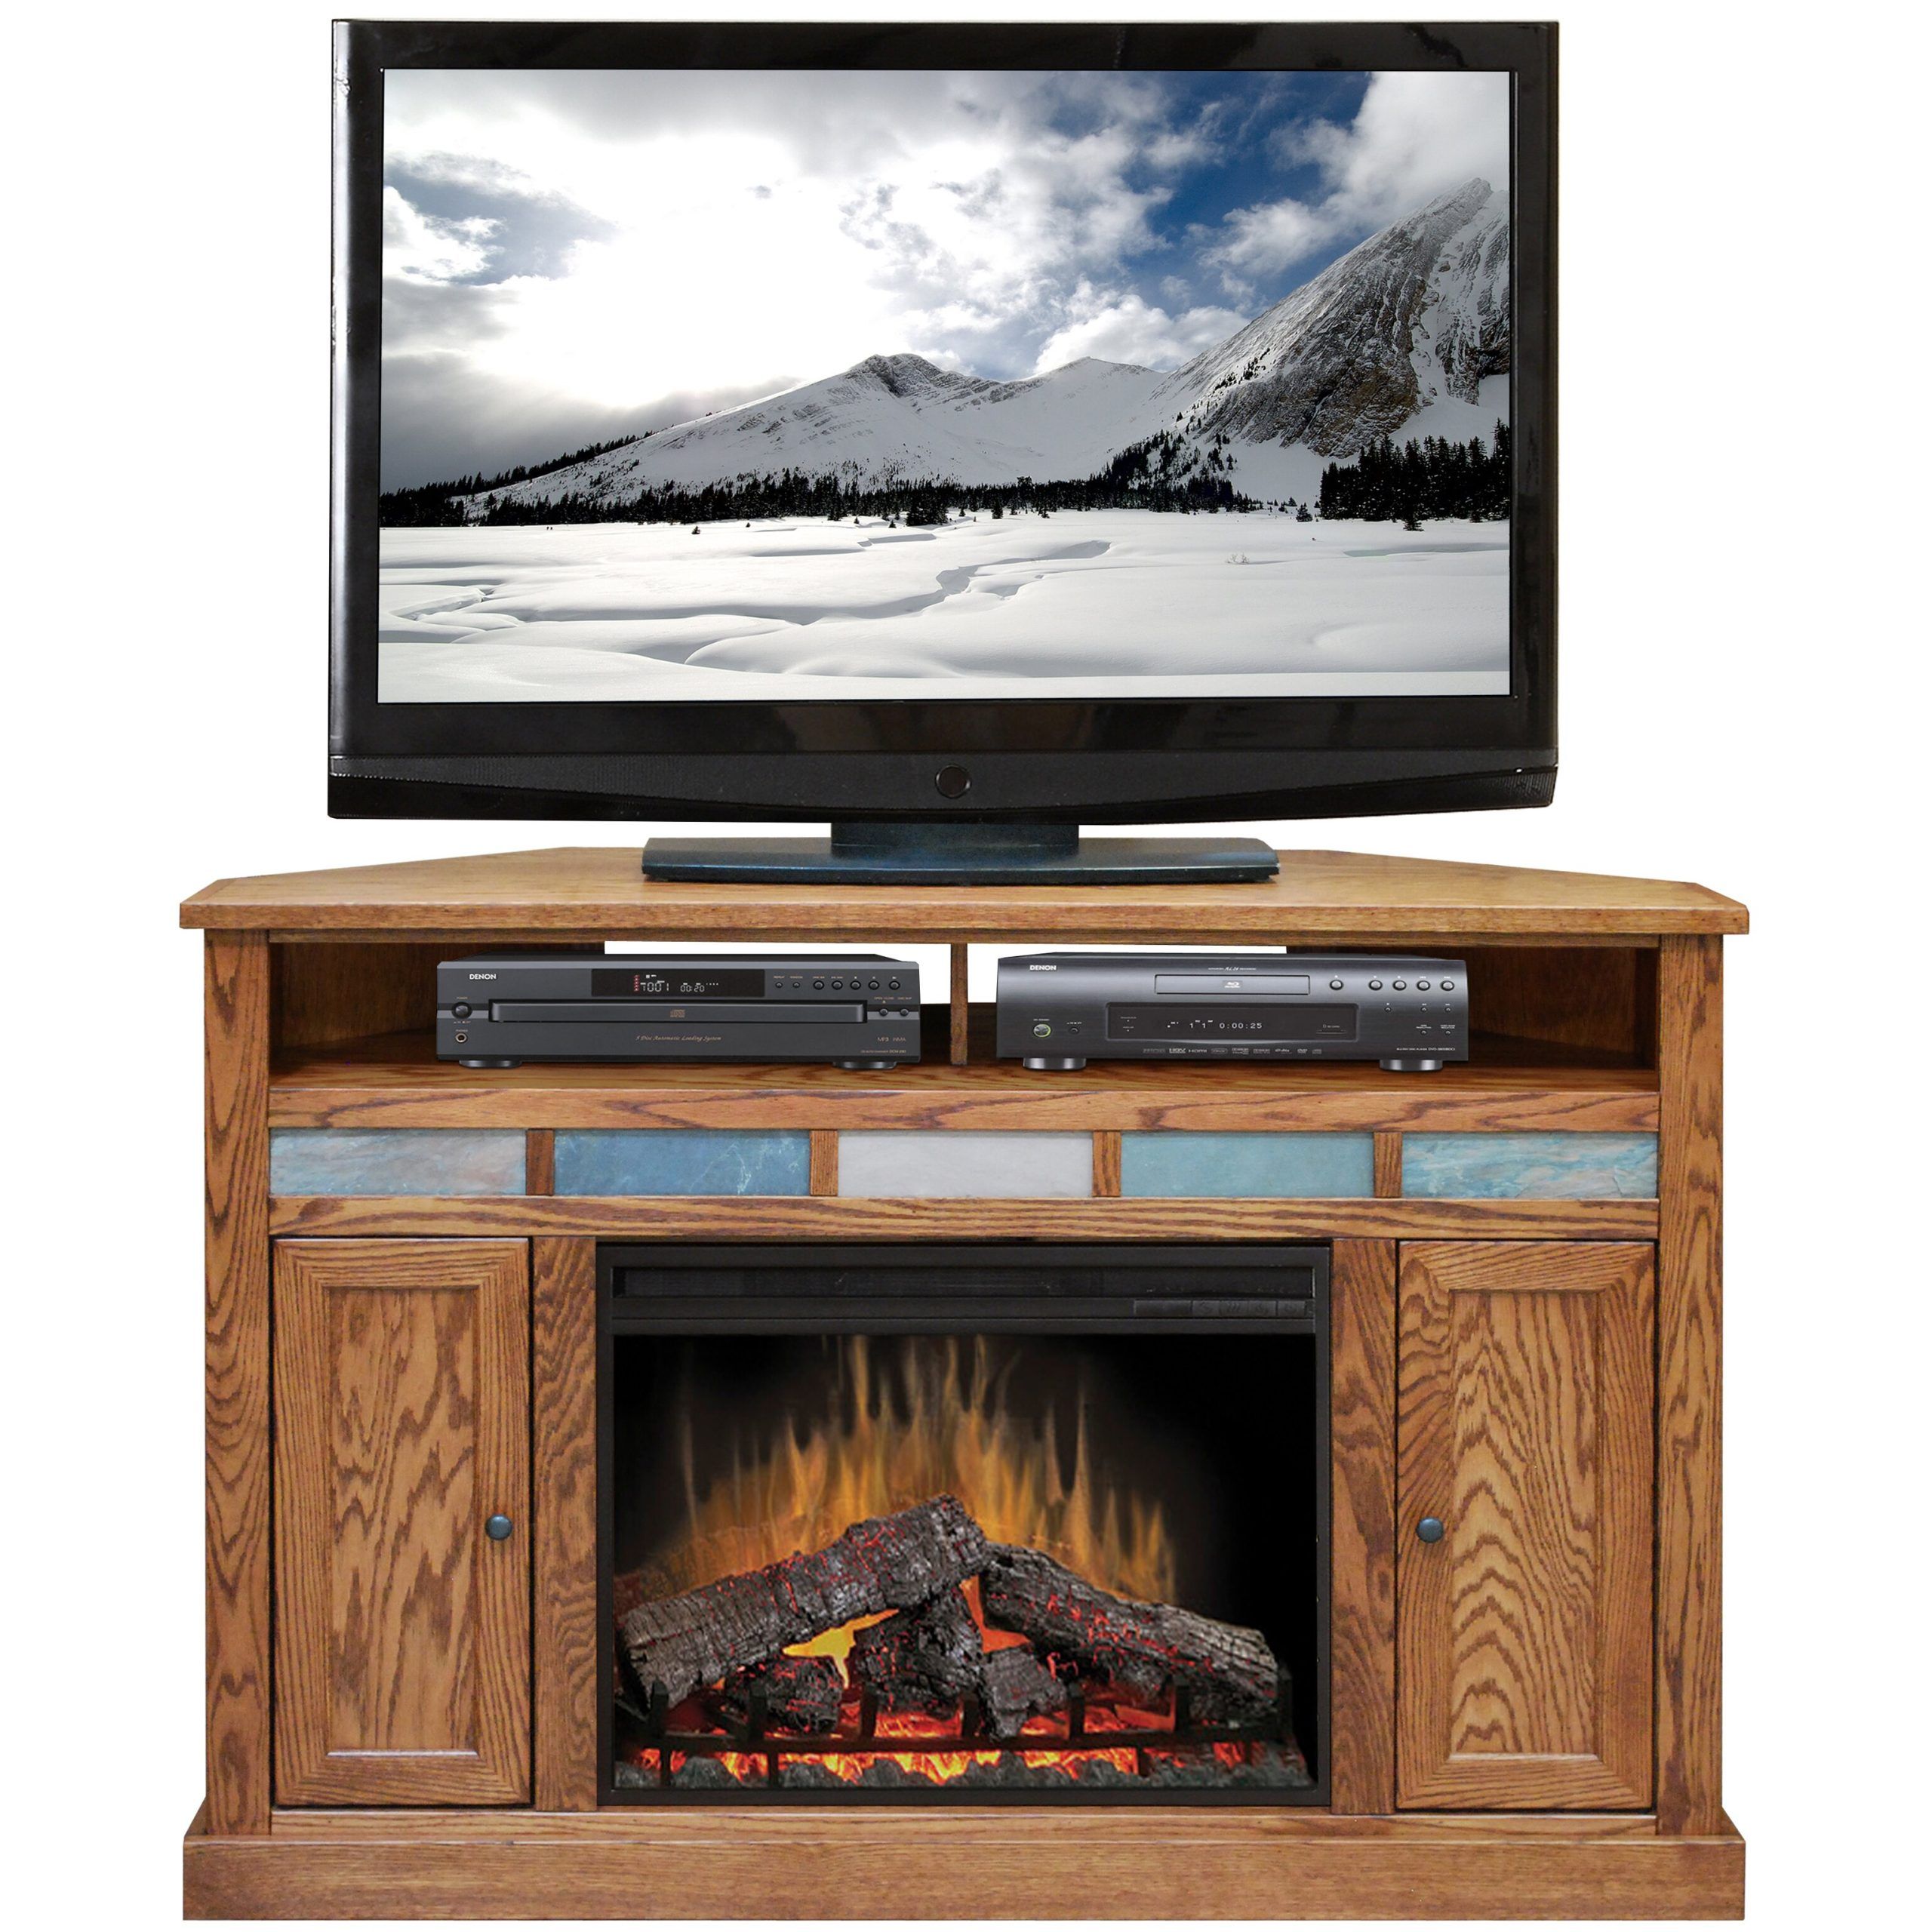 Legends Furniture Oak Creek Tv Stand With Electric Fireplace & Reviews Pertaining To Tv Stands With Electric Fireplace (View 11 of 20)